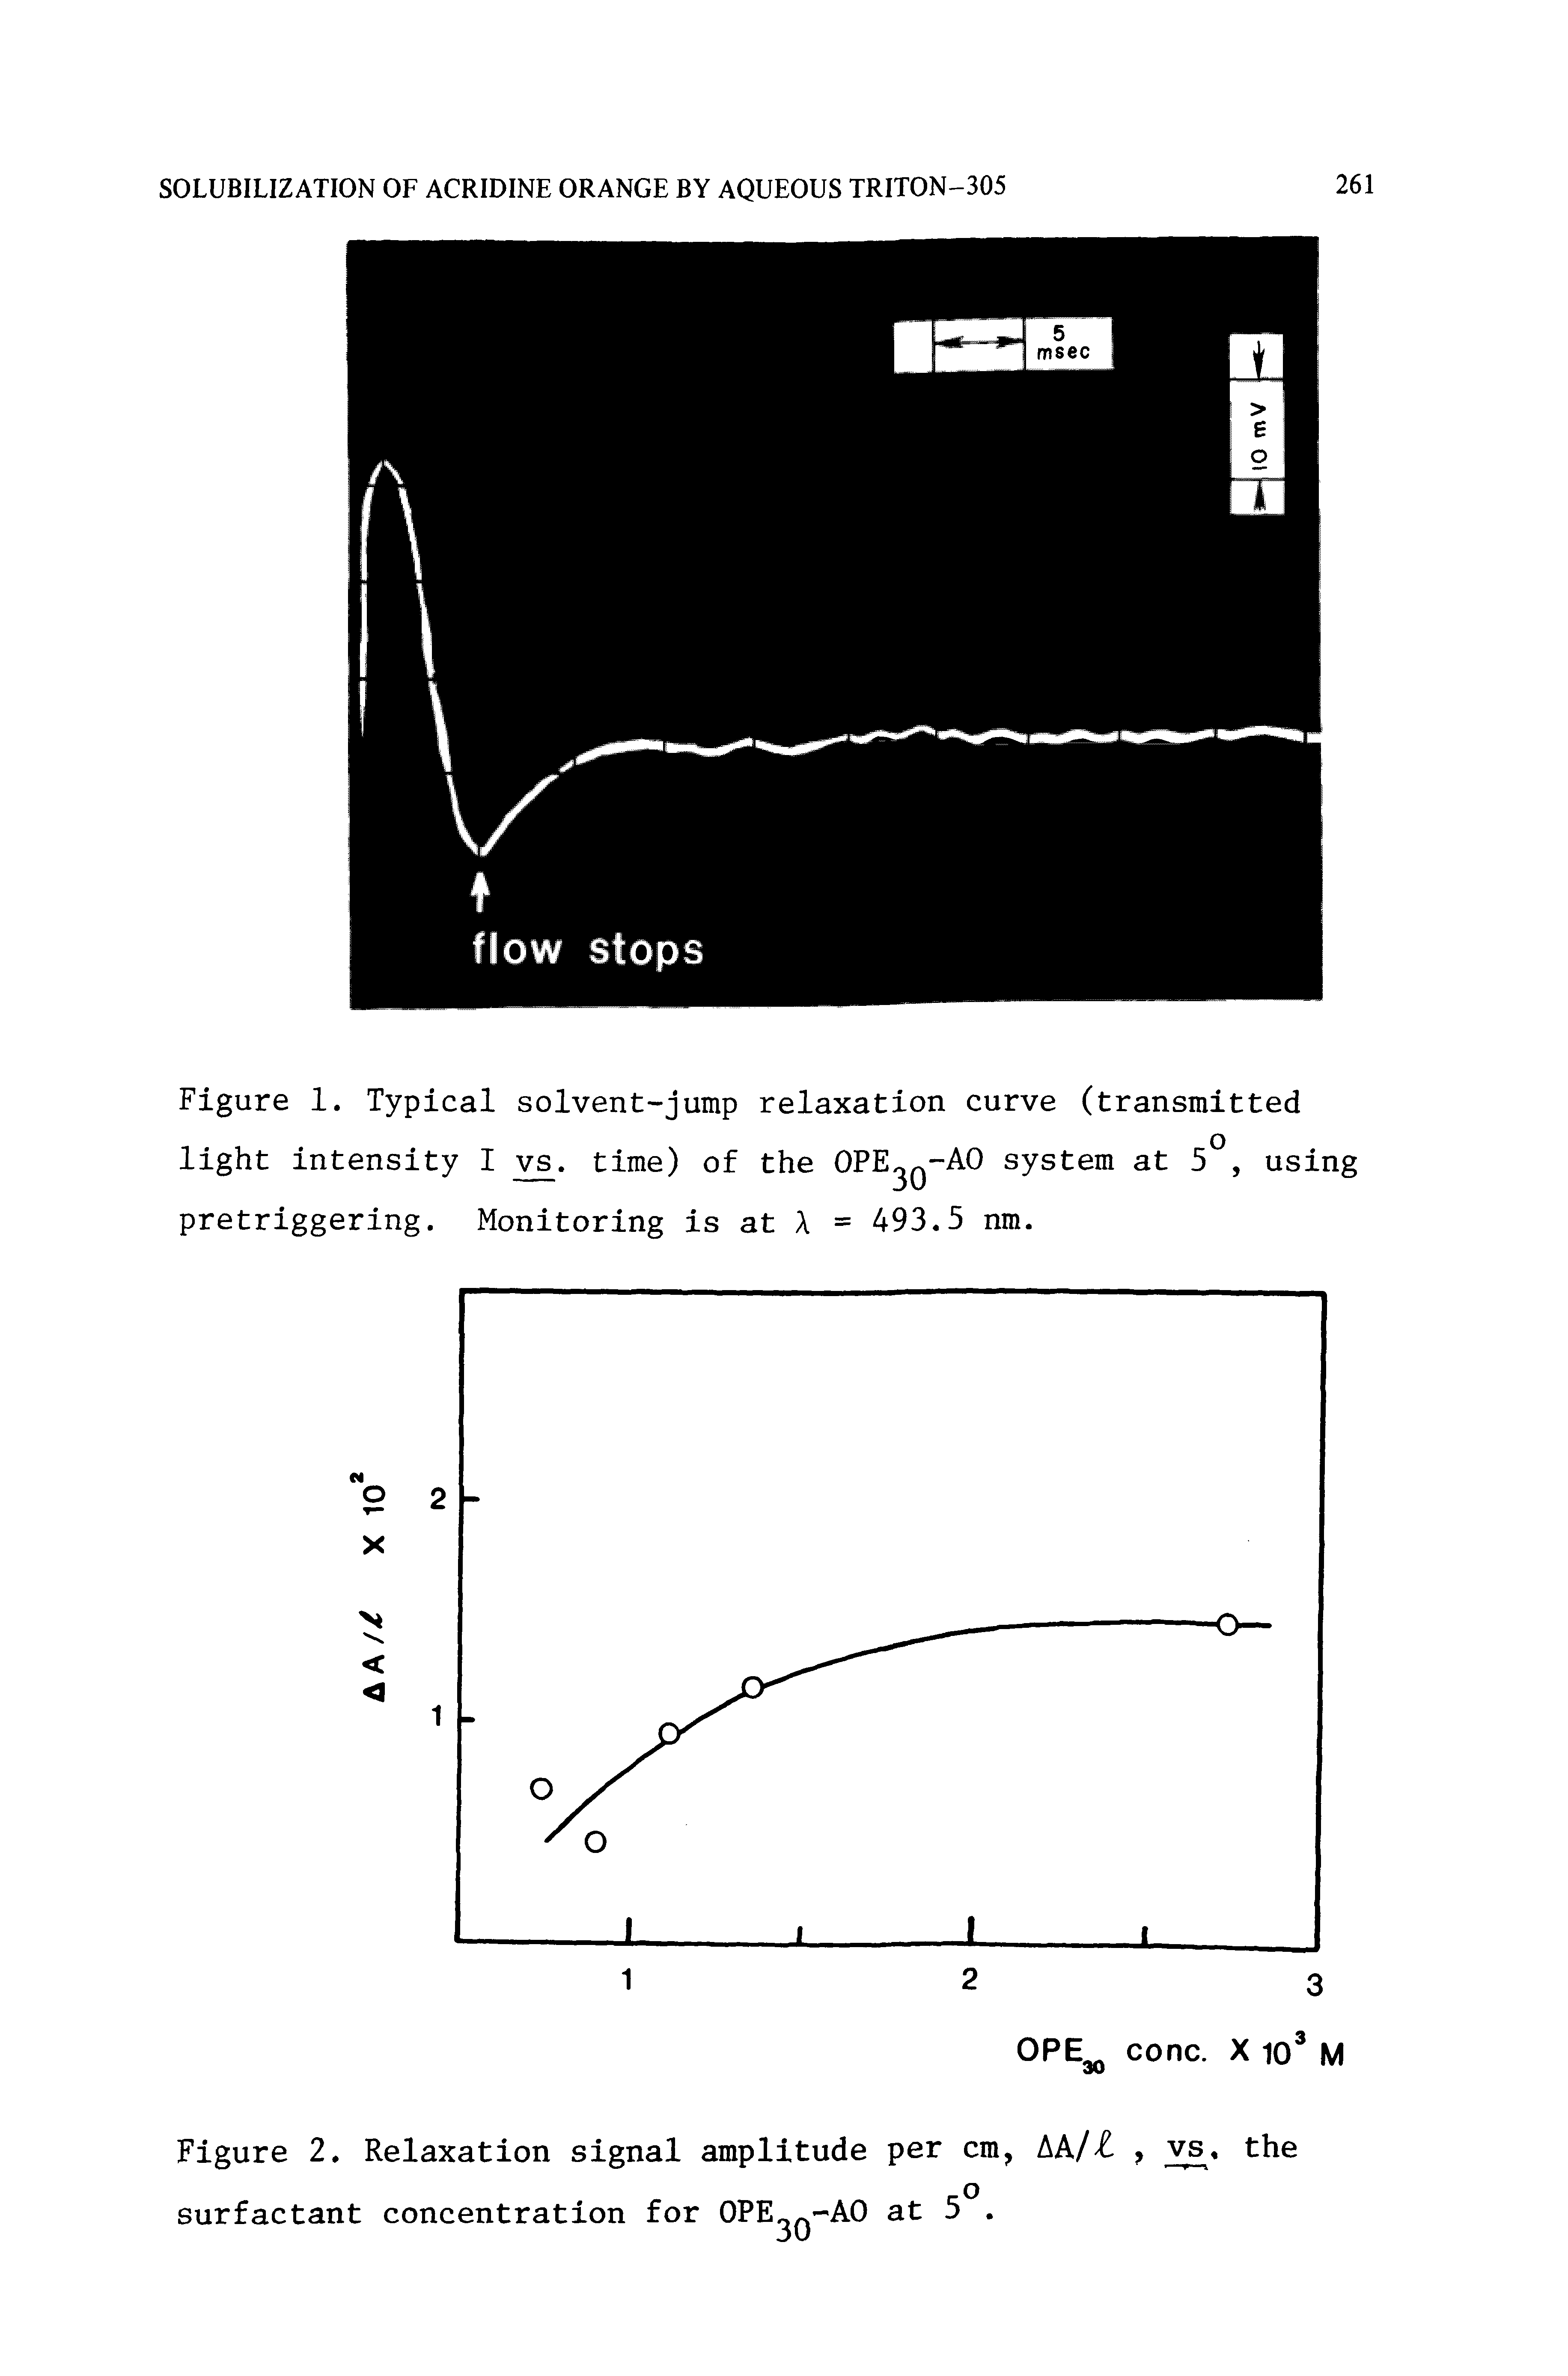 Figure 1. Typical solvent-jump relaxation curve (transmitted light intensity I v . time) of the OPE q-AO system at 5, using pretriggering. Monitoring is at A = 493.5 nm.